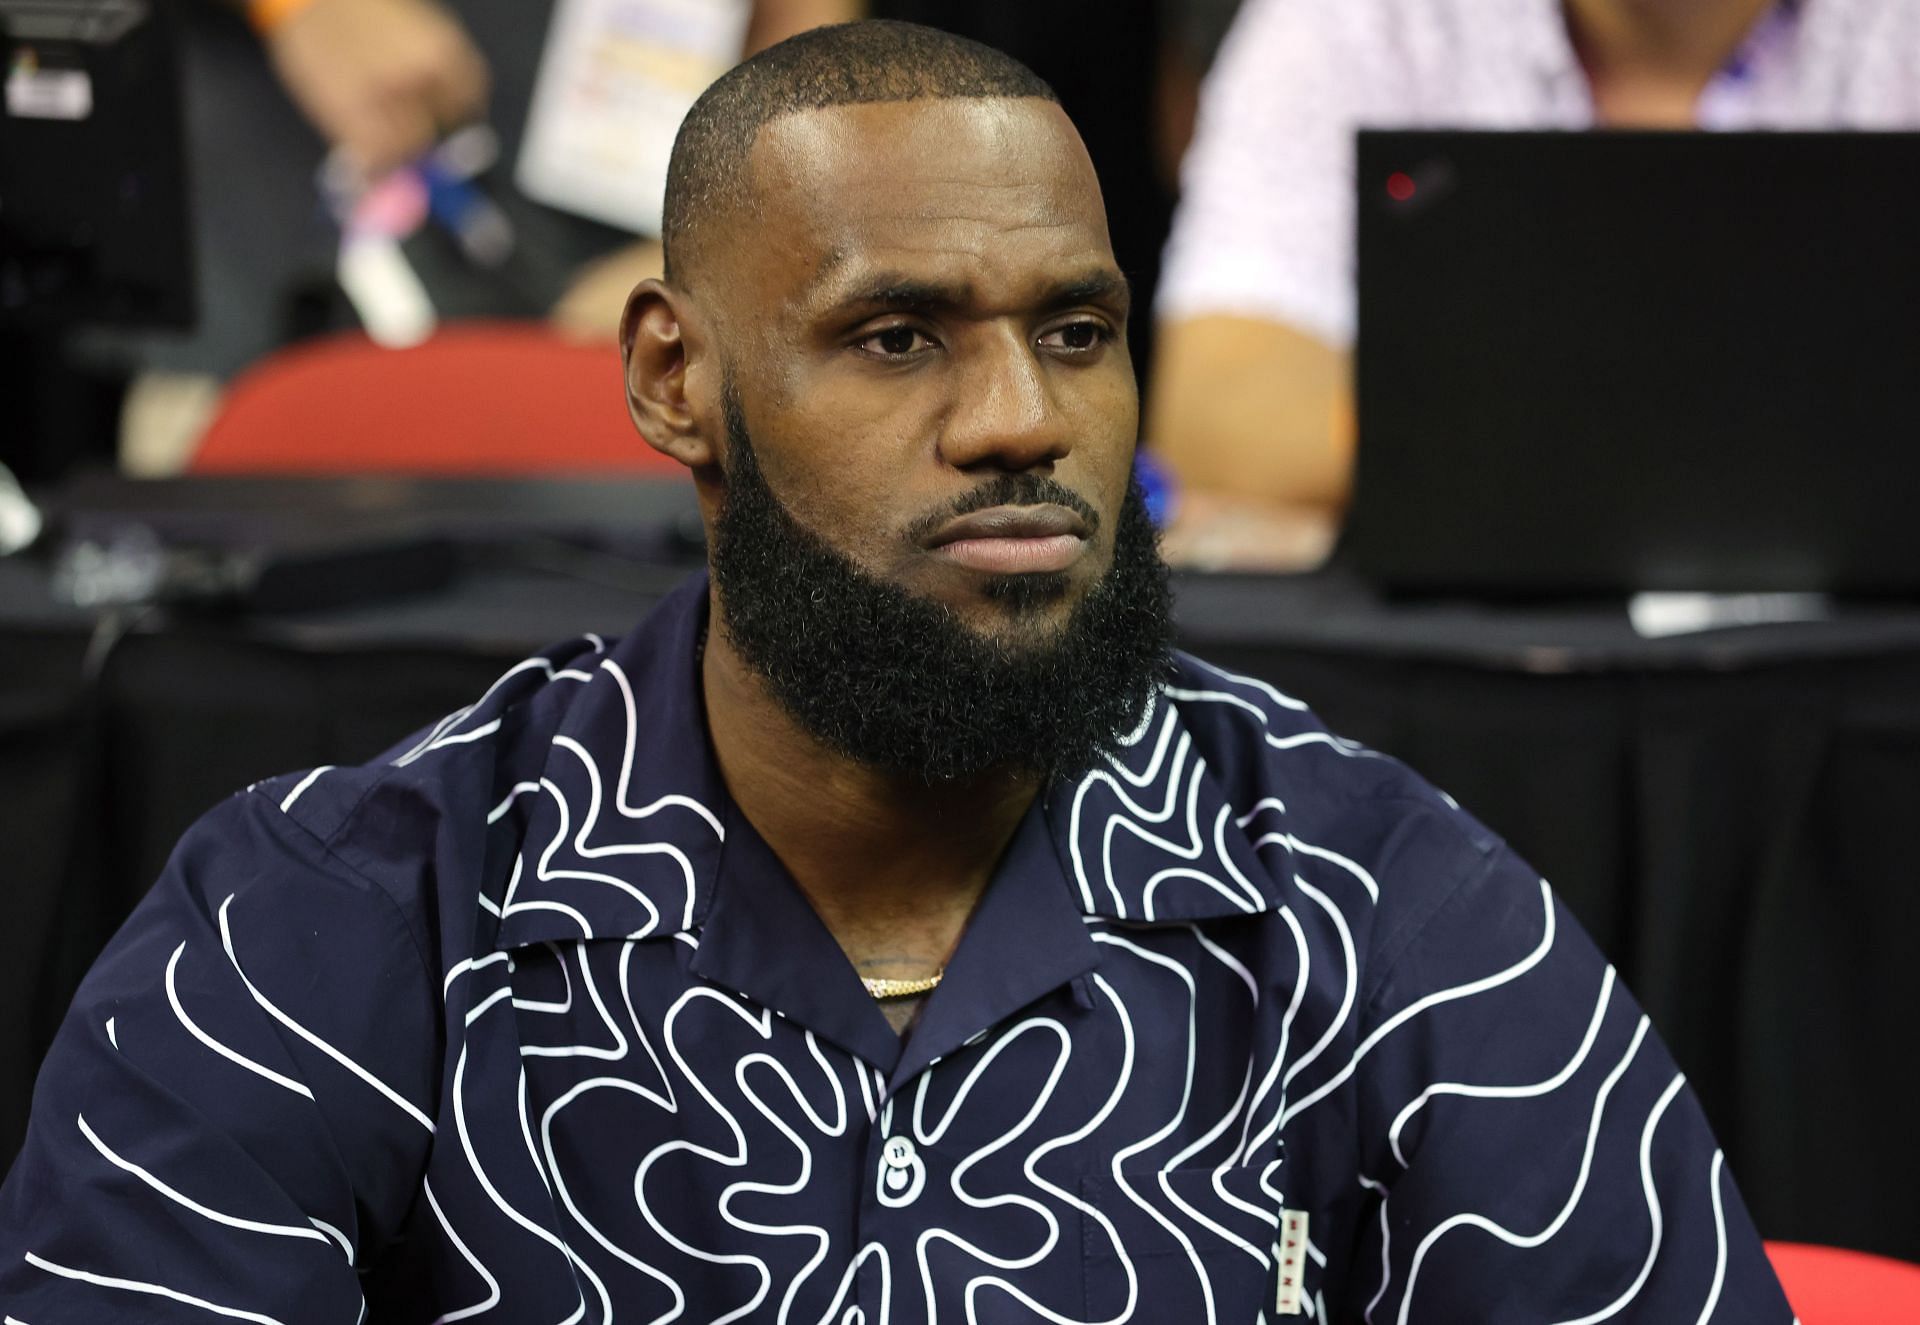 LeBron James of the LA Lakers attends a game between the Lakers and the Phoenix Suns during the Summer League at the Thomas &amp; Mack Center on July 8 in Las Vegas, Nevada.